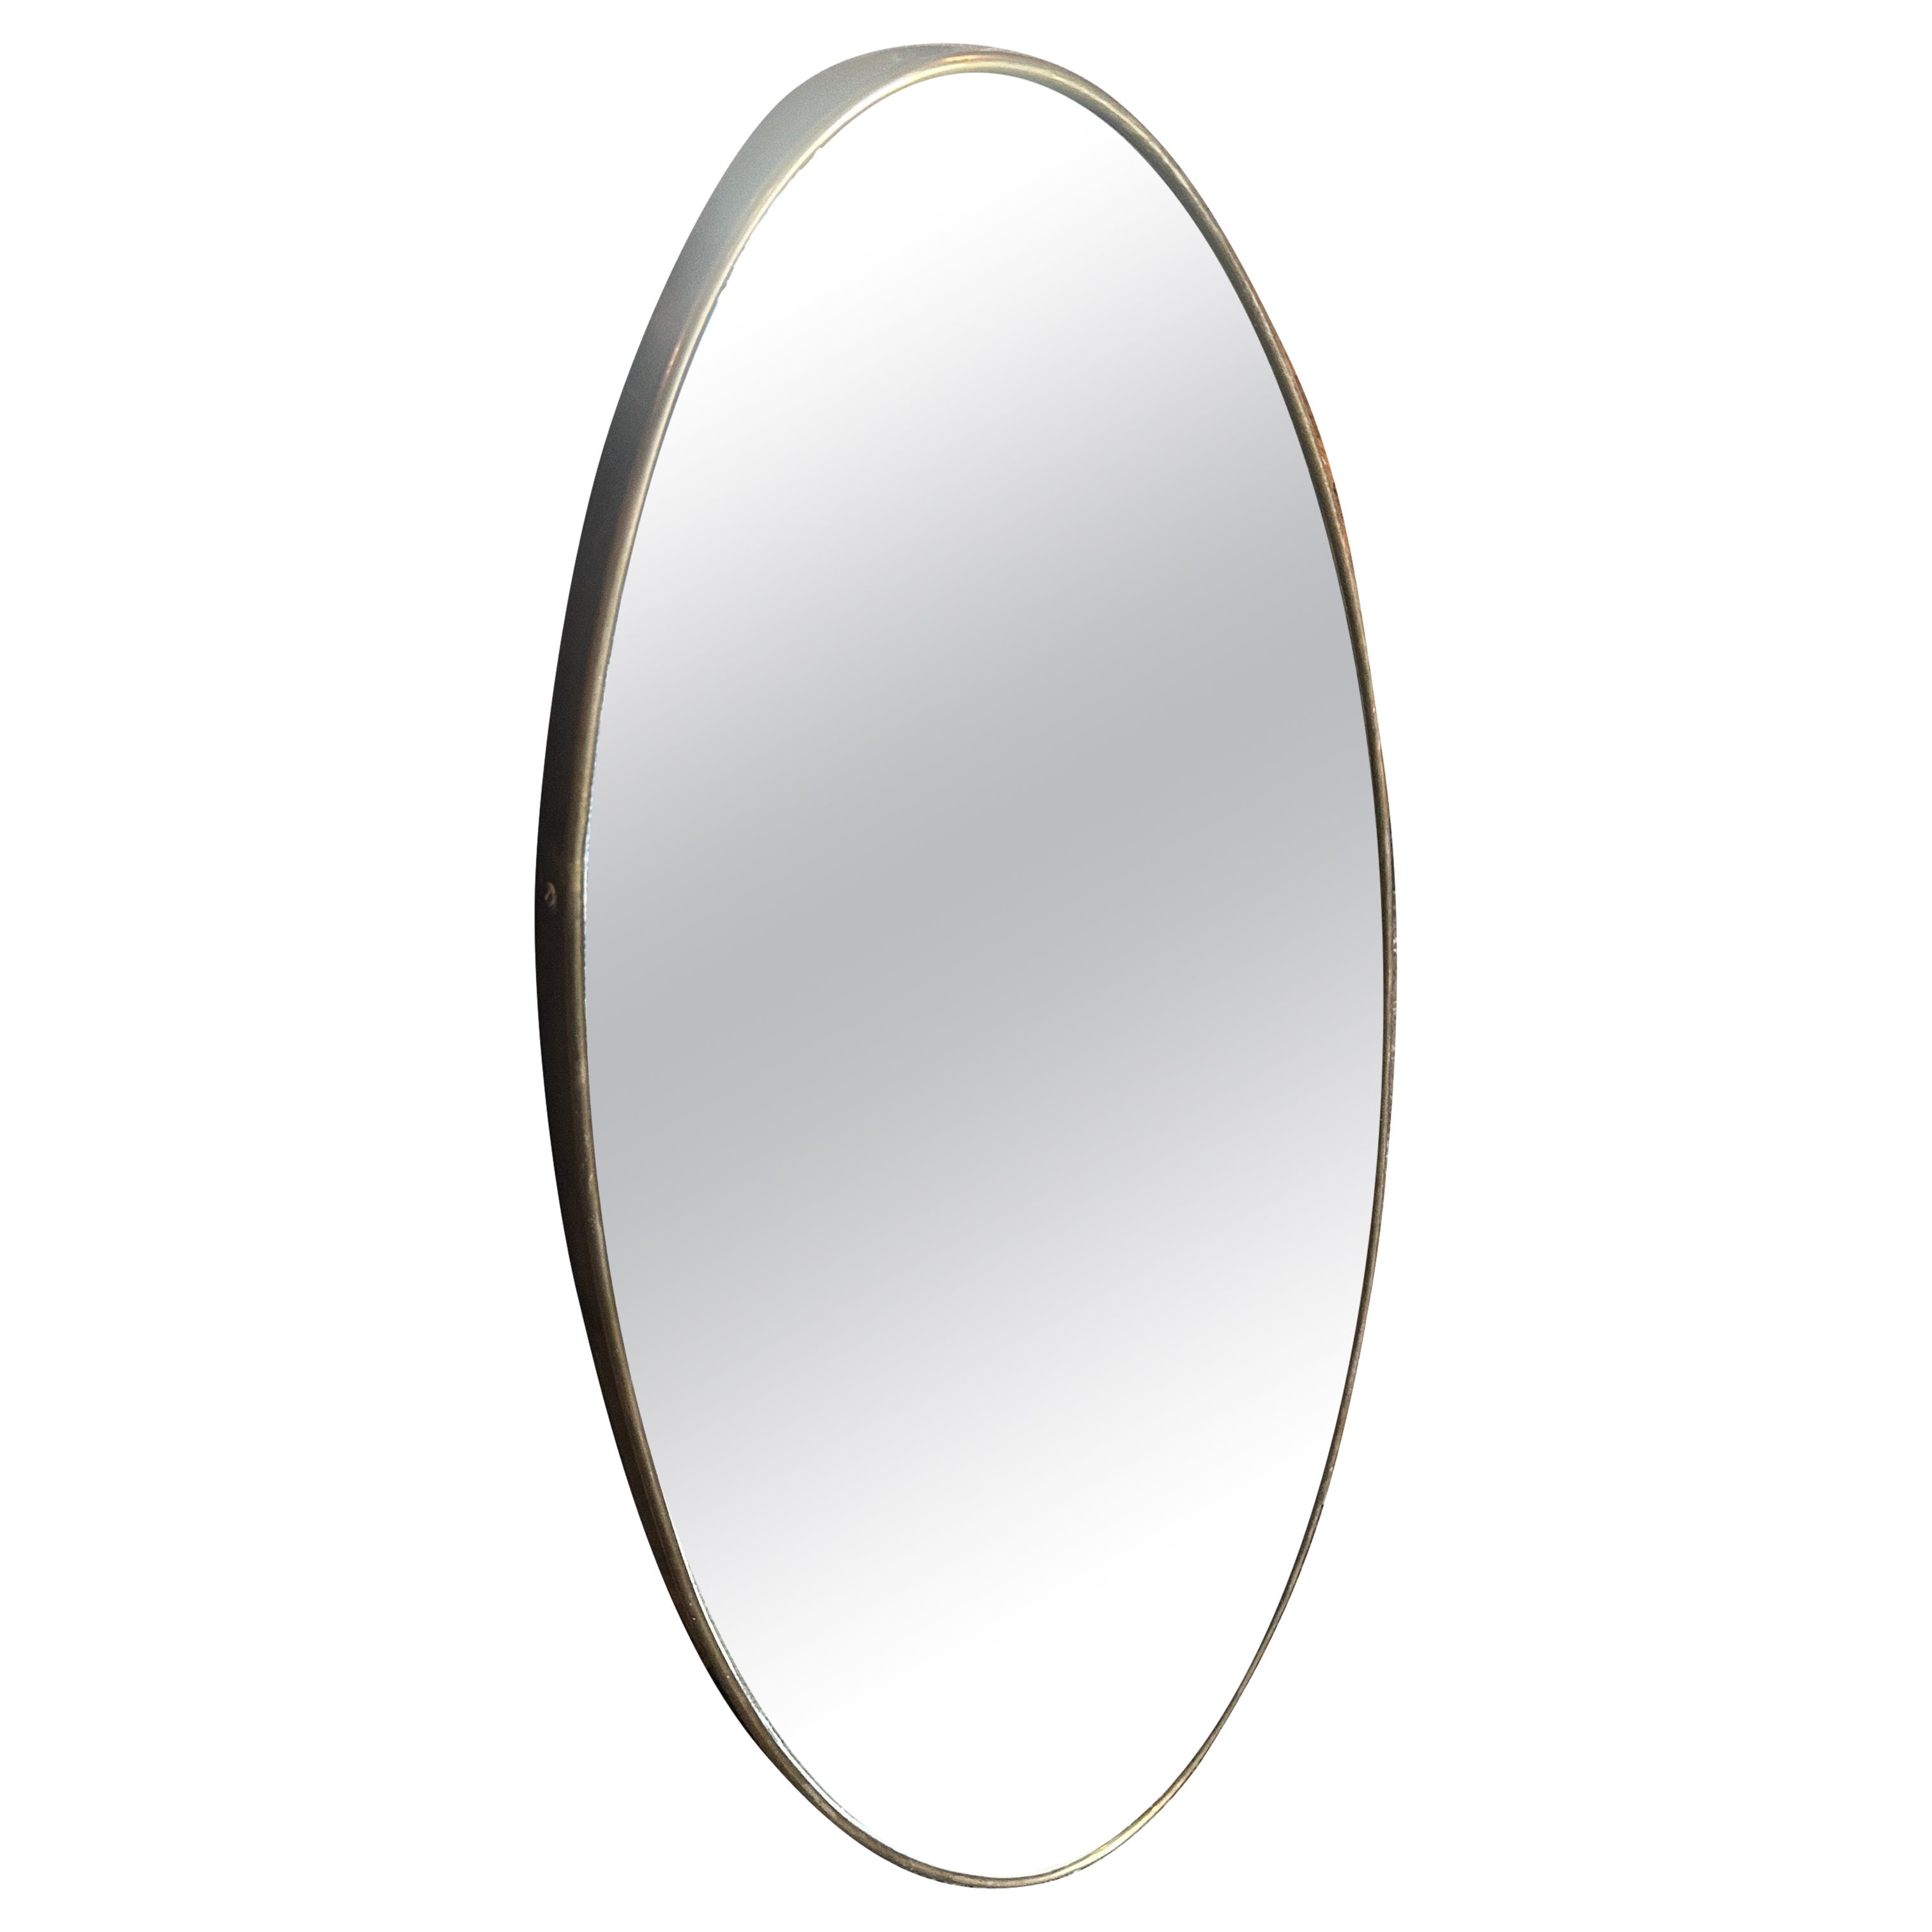 1950s Gio Ponti Style Mid-Century Modern Brass Oval Wall Mirror For Sale